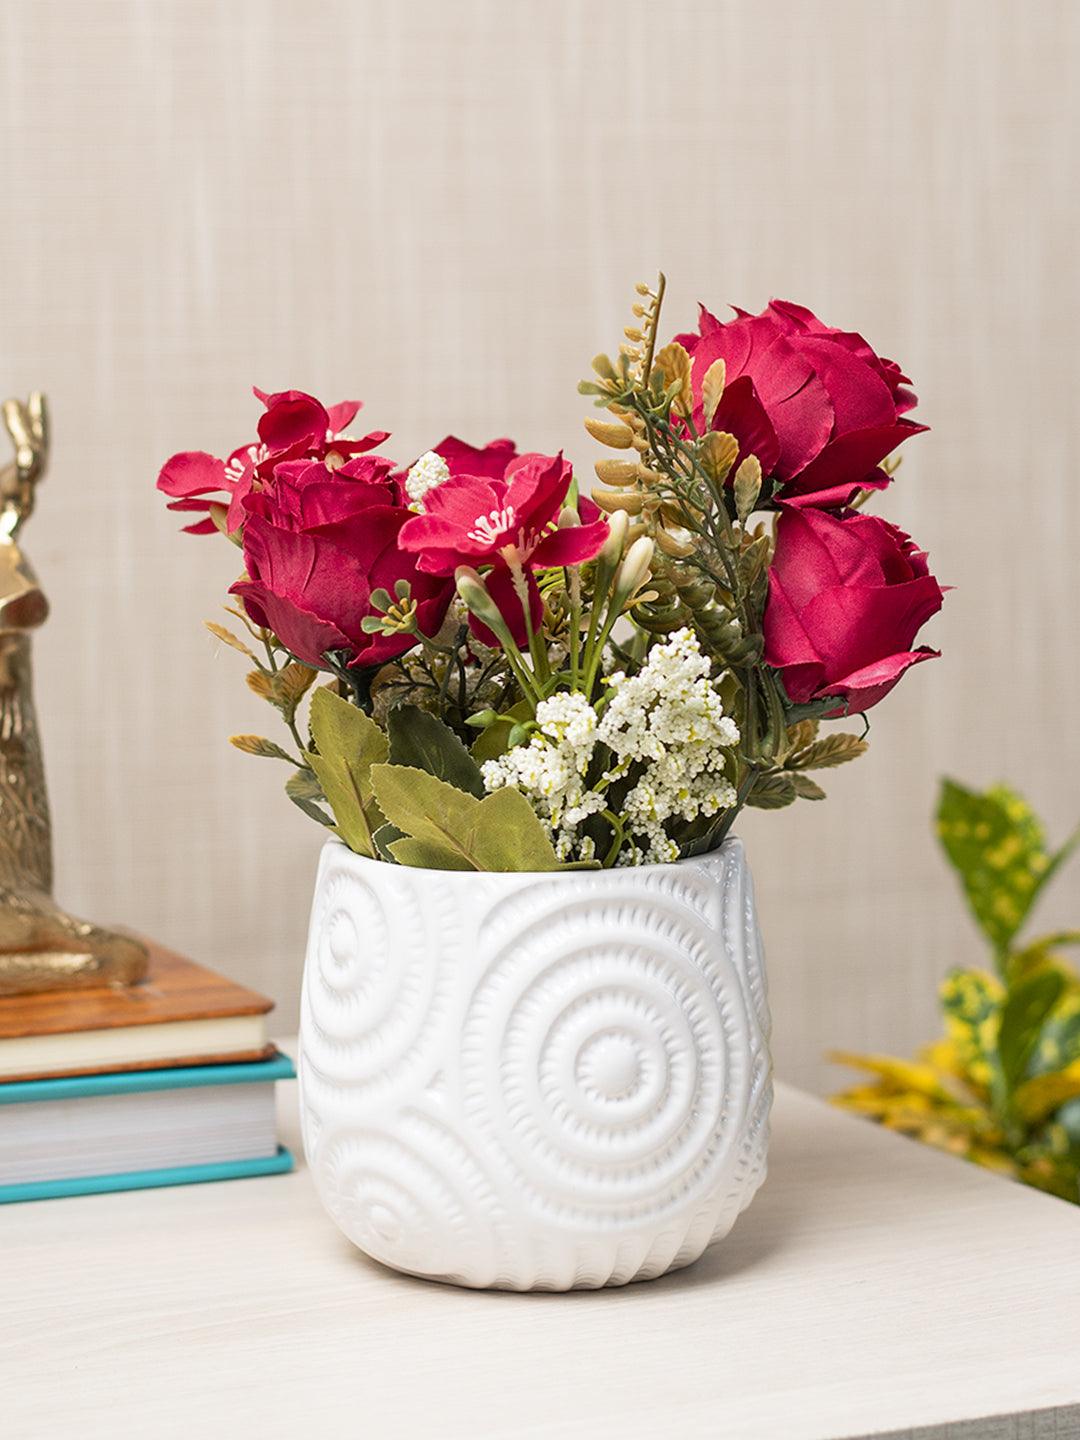 Dark Red Roses With Turquoise Pot - MARKET 99